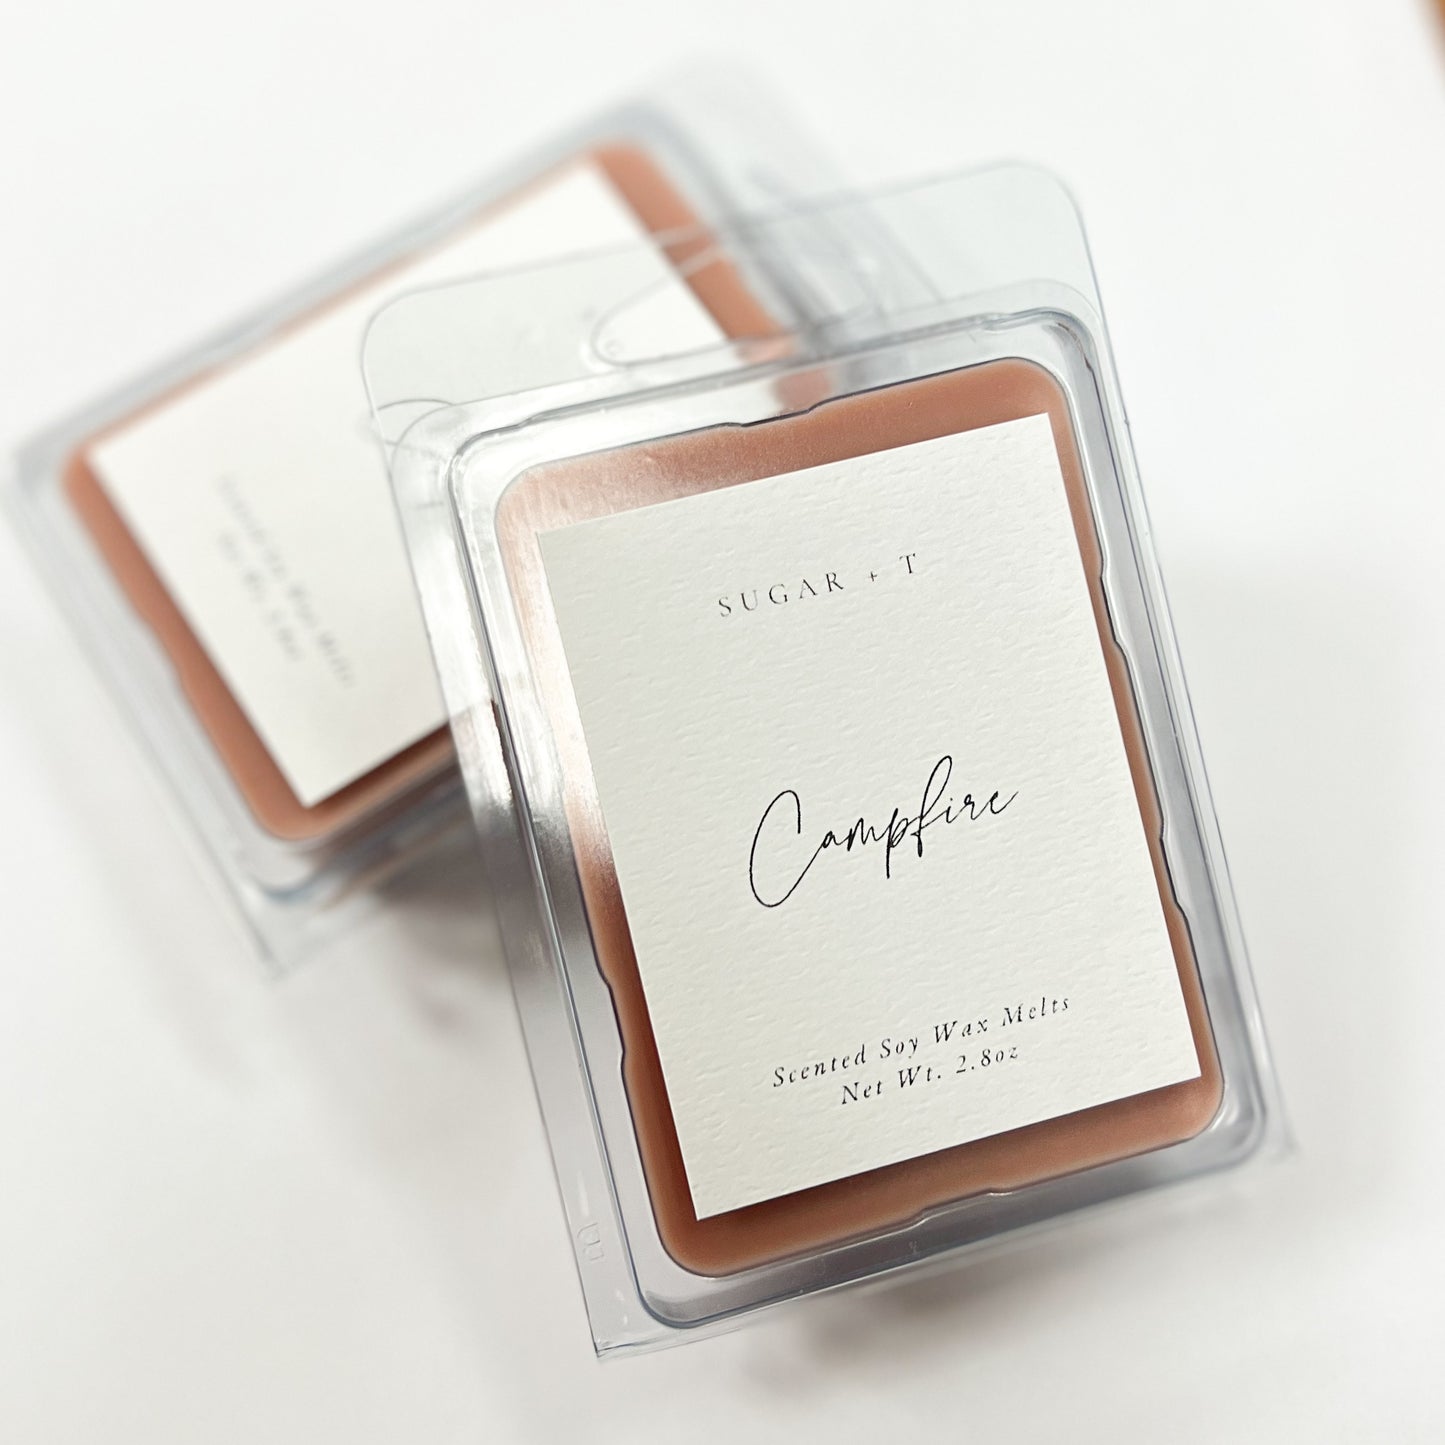 Campfire Scented Wax Melts